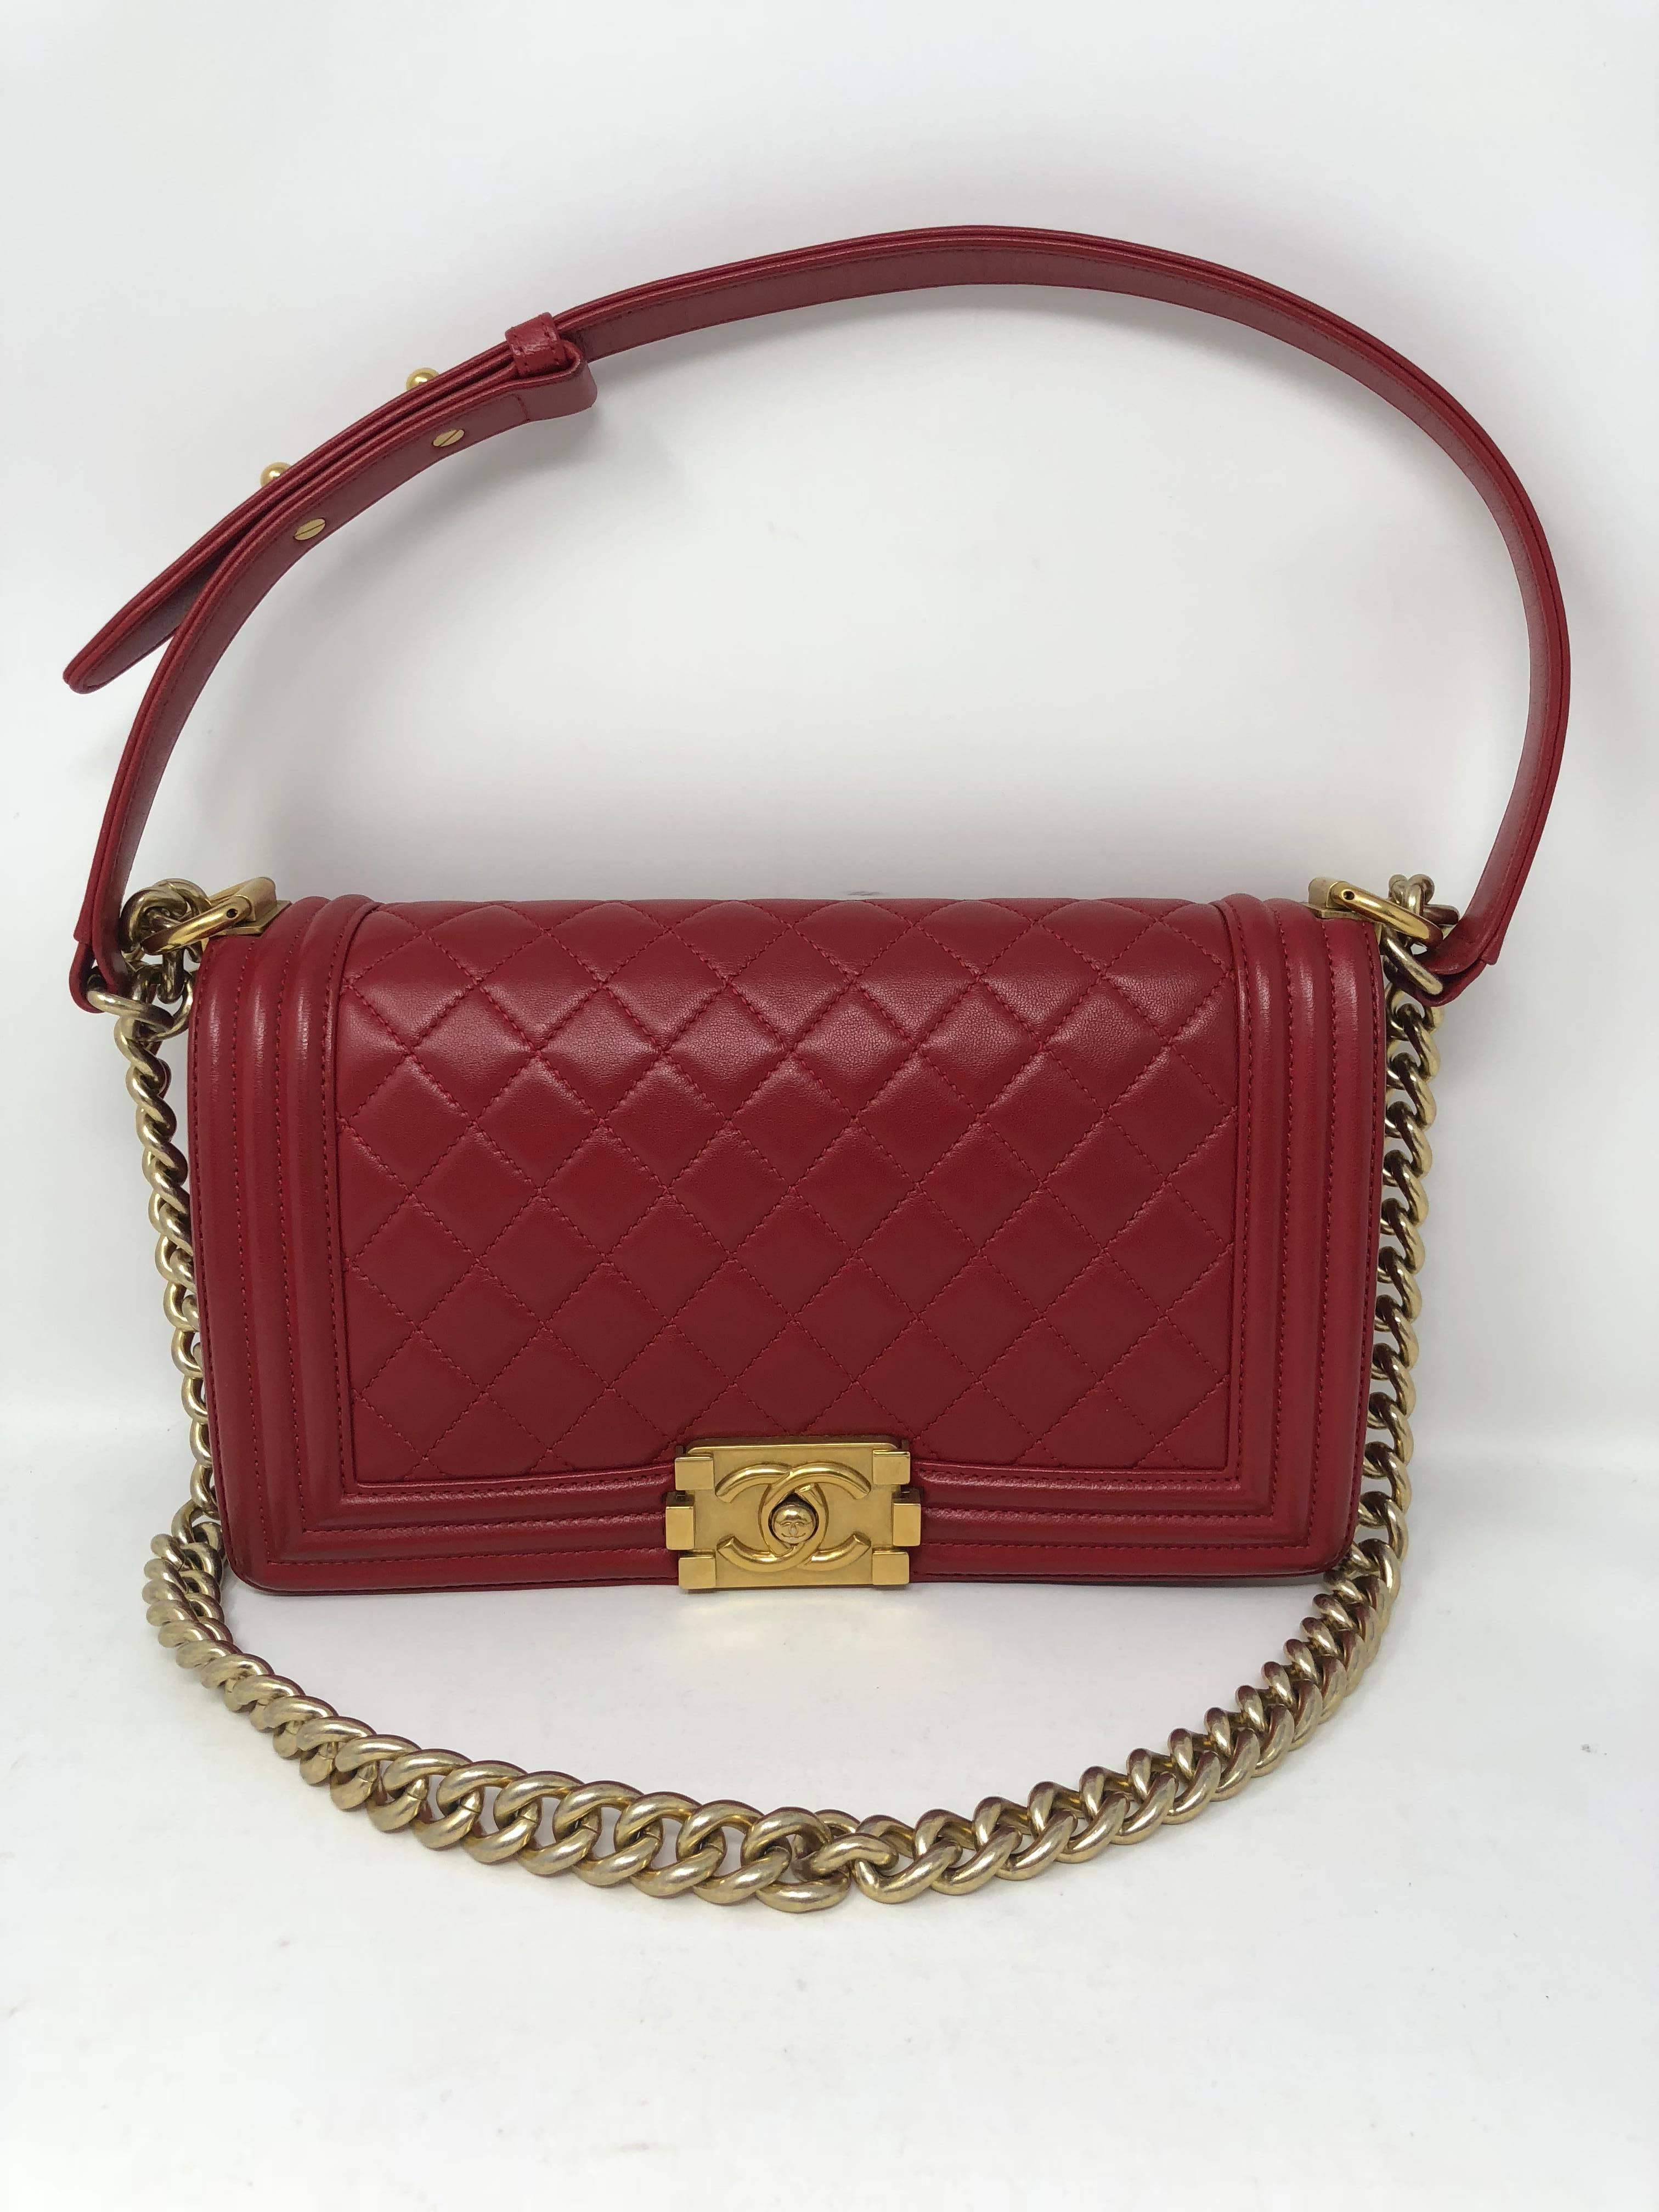 Chanel Le Boy Bag in red quilted lambskin leather with gold hardware. Great condition. From 2017 comes with authenticity card and serial number is inside tag. Guaranteed authentic. 